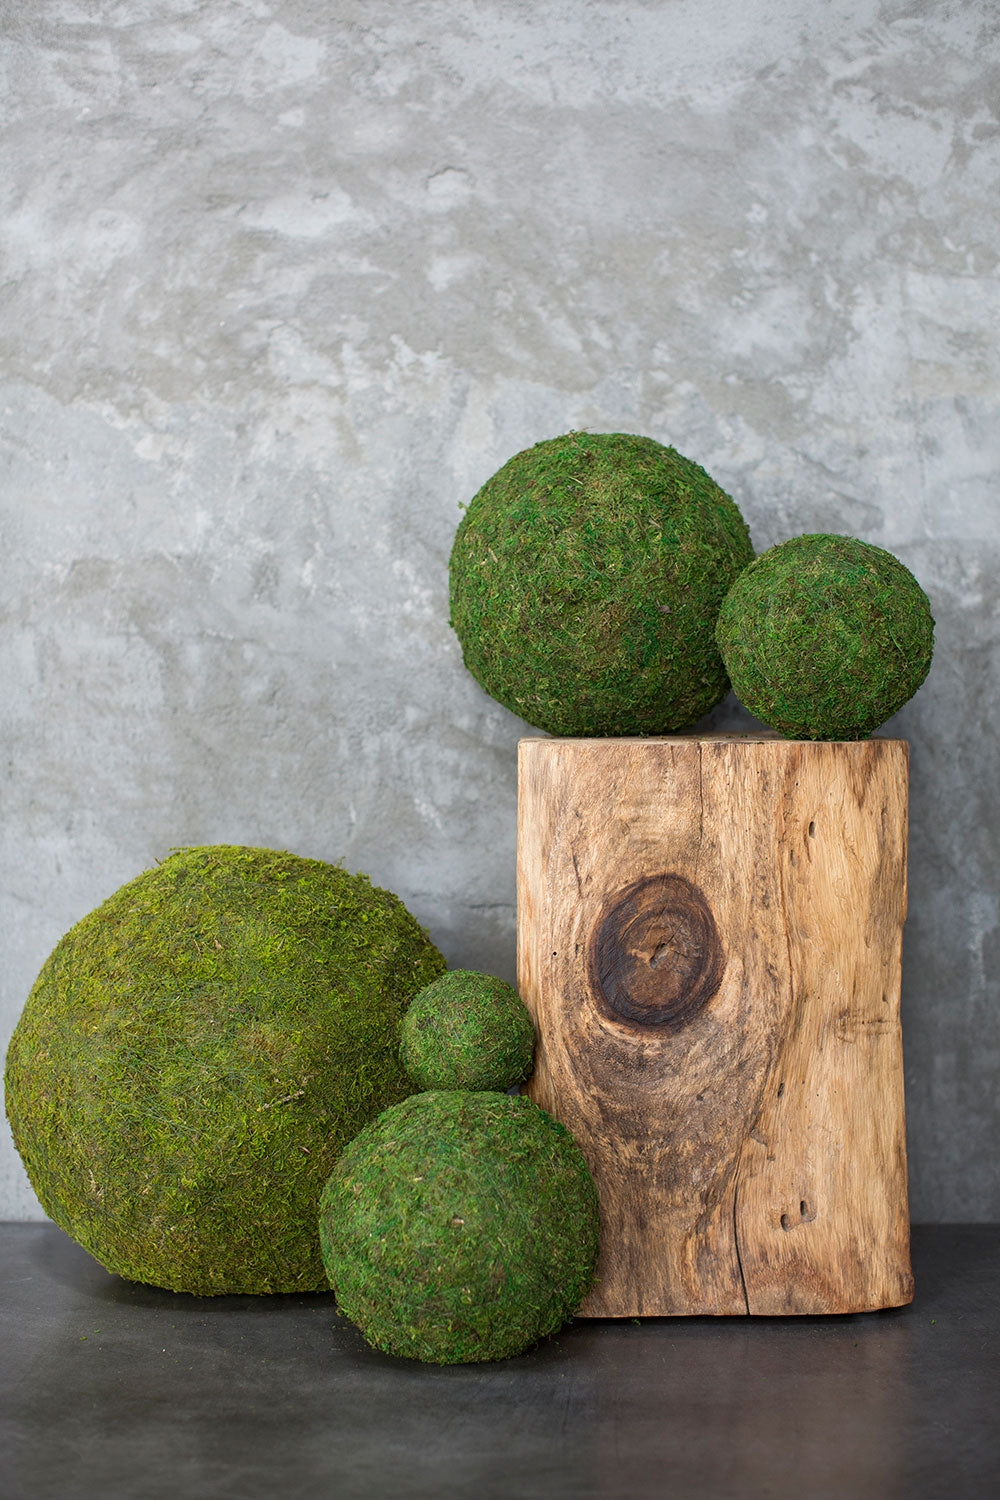 Moss Ball Md 5 Forever Green Art 5 inch Medium Preserved Moss Ball made in  America [mos05] - $21.00 : Forever Green Art, Preserved Plants for Home and  Business